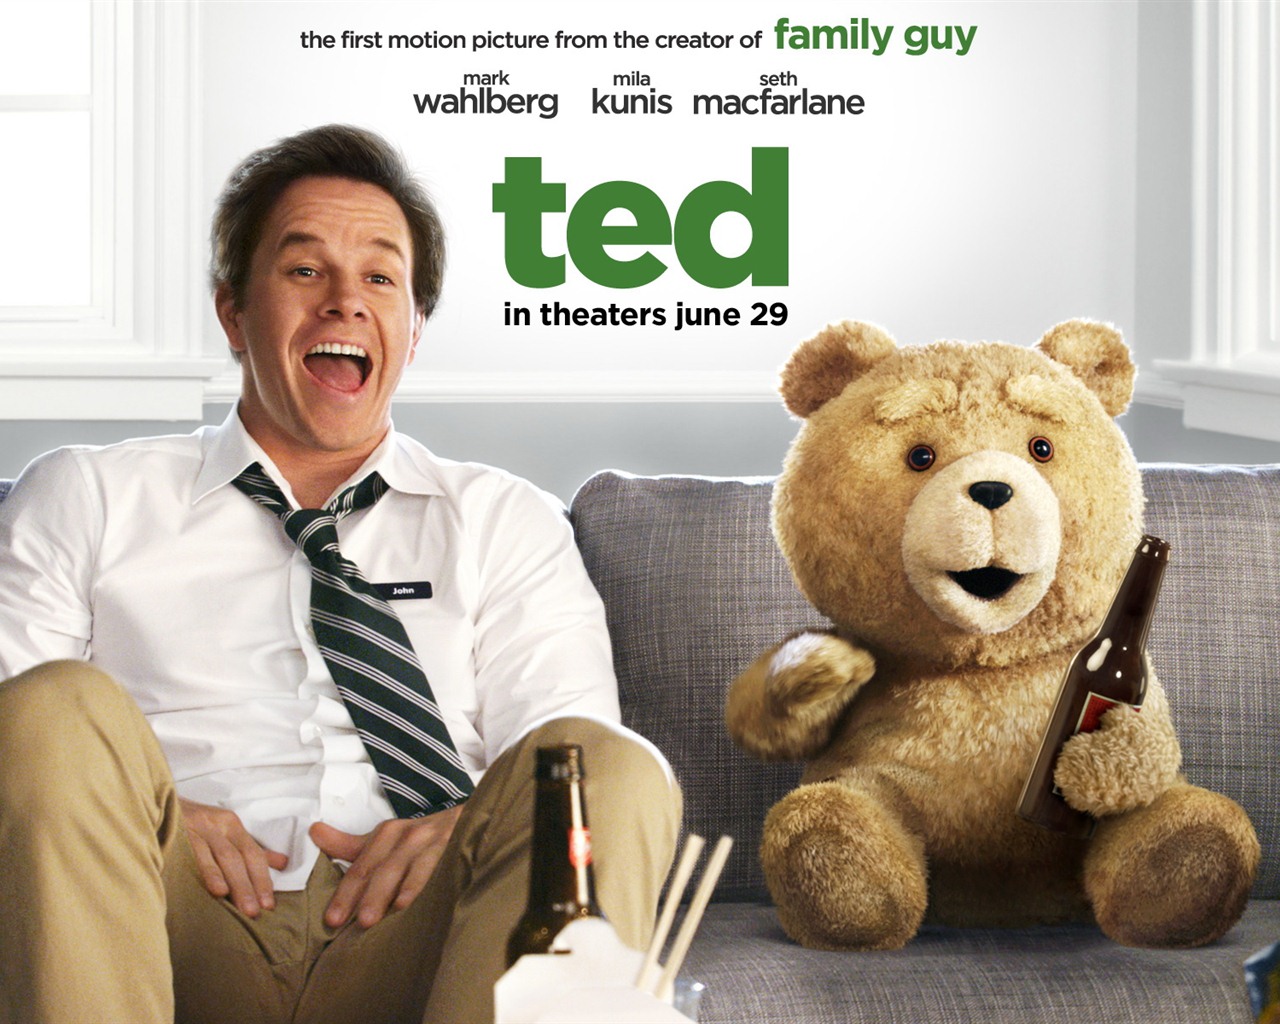 Ted 2012 HD movie wallpapers #1 - 1280x1024